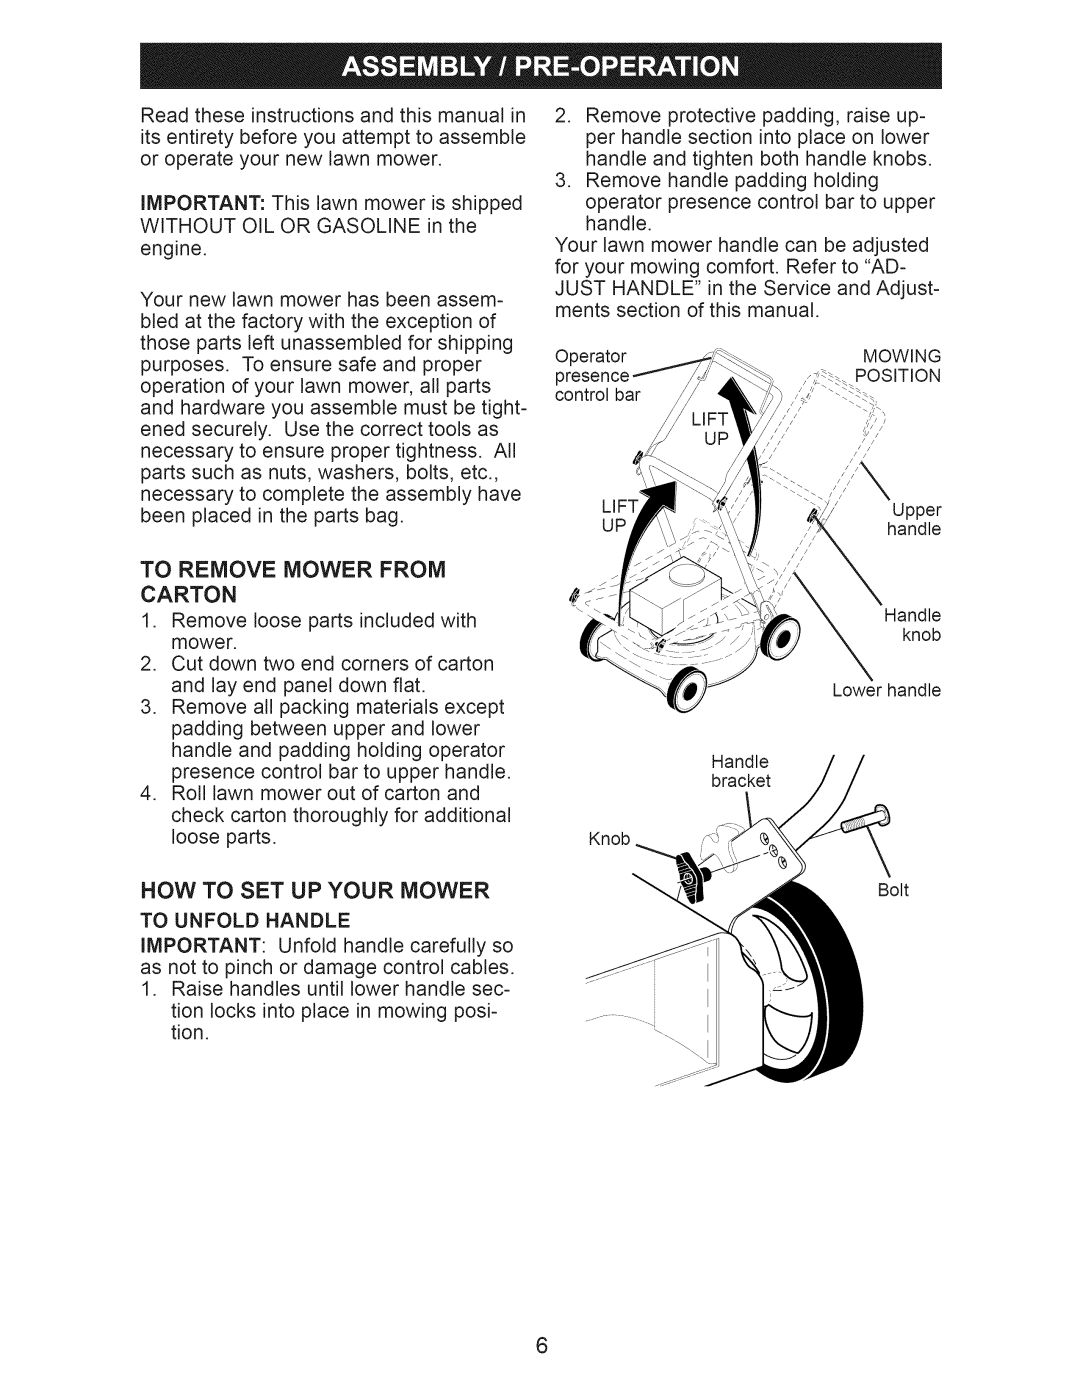 Craftsman 917.374366, 700 Series owner manual Now To Set Up Your Mower, To Remove Mower From Carton 